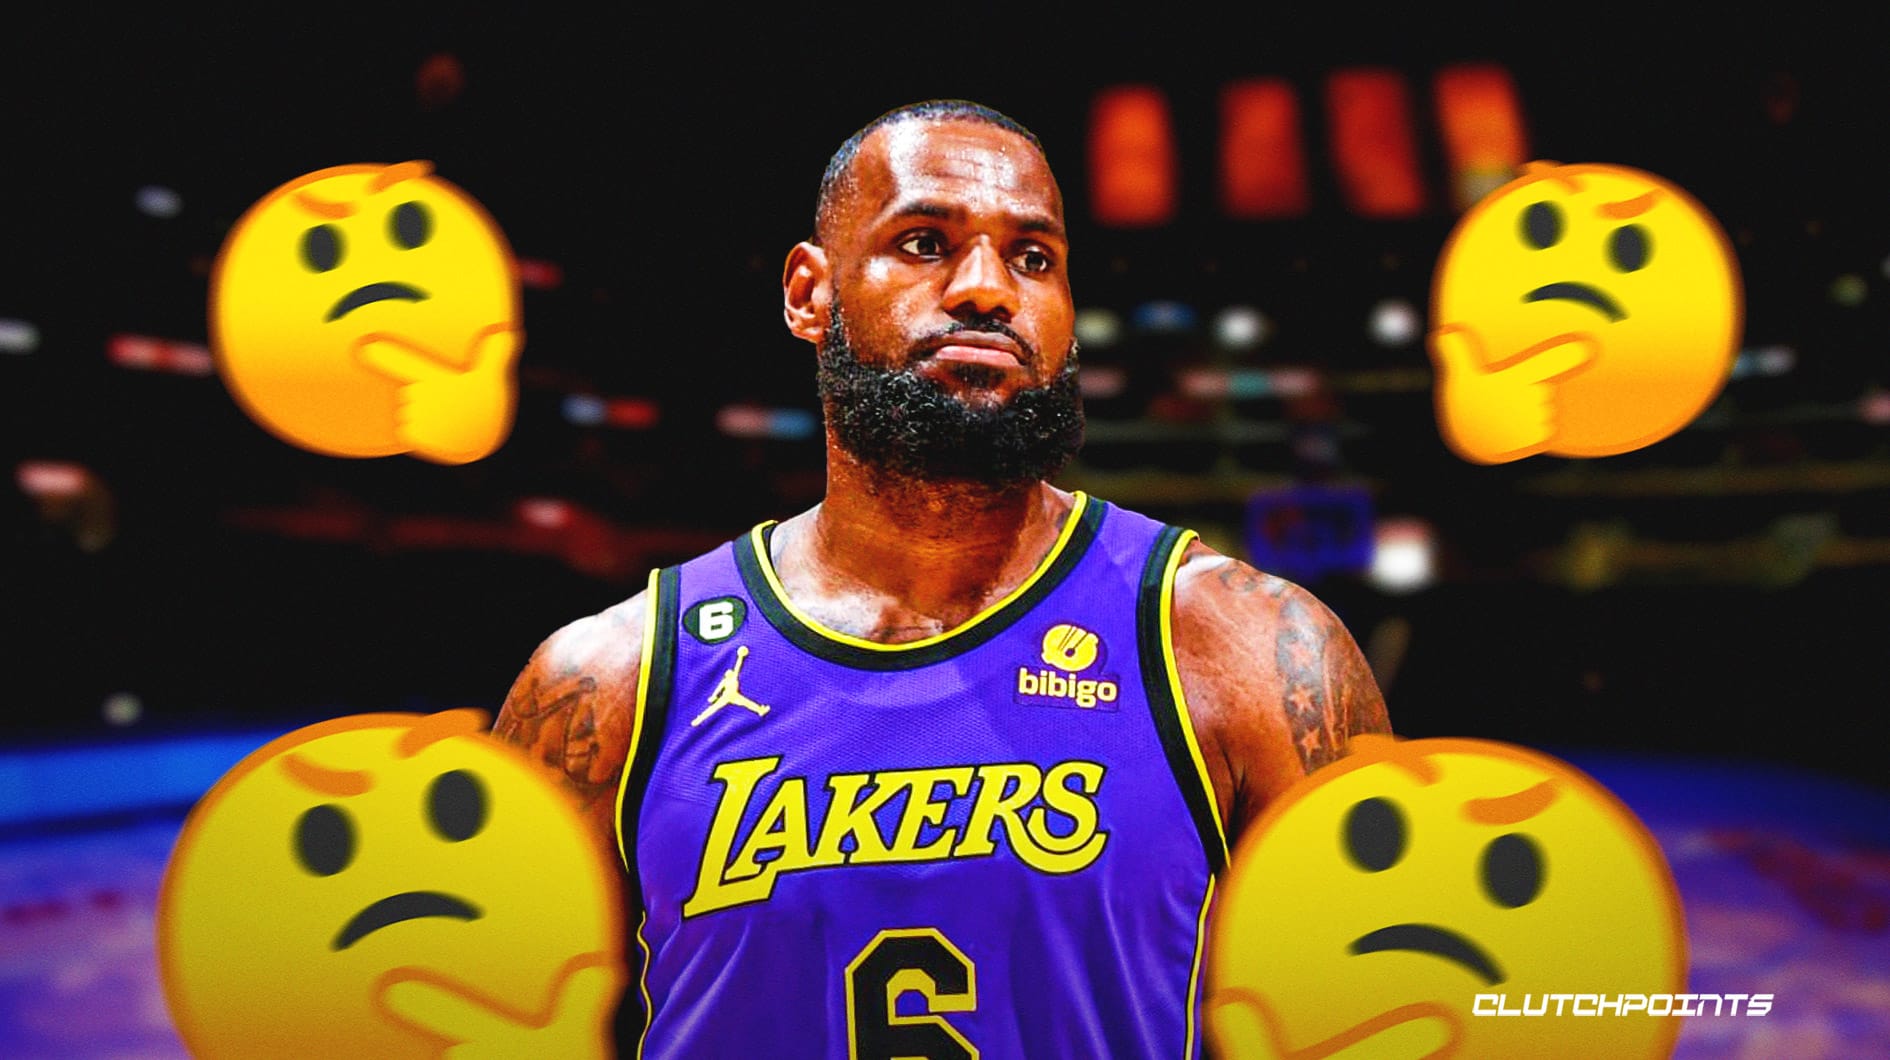 LeBron James expected to return for the 2023/24 season